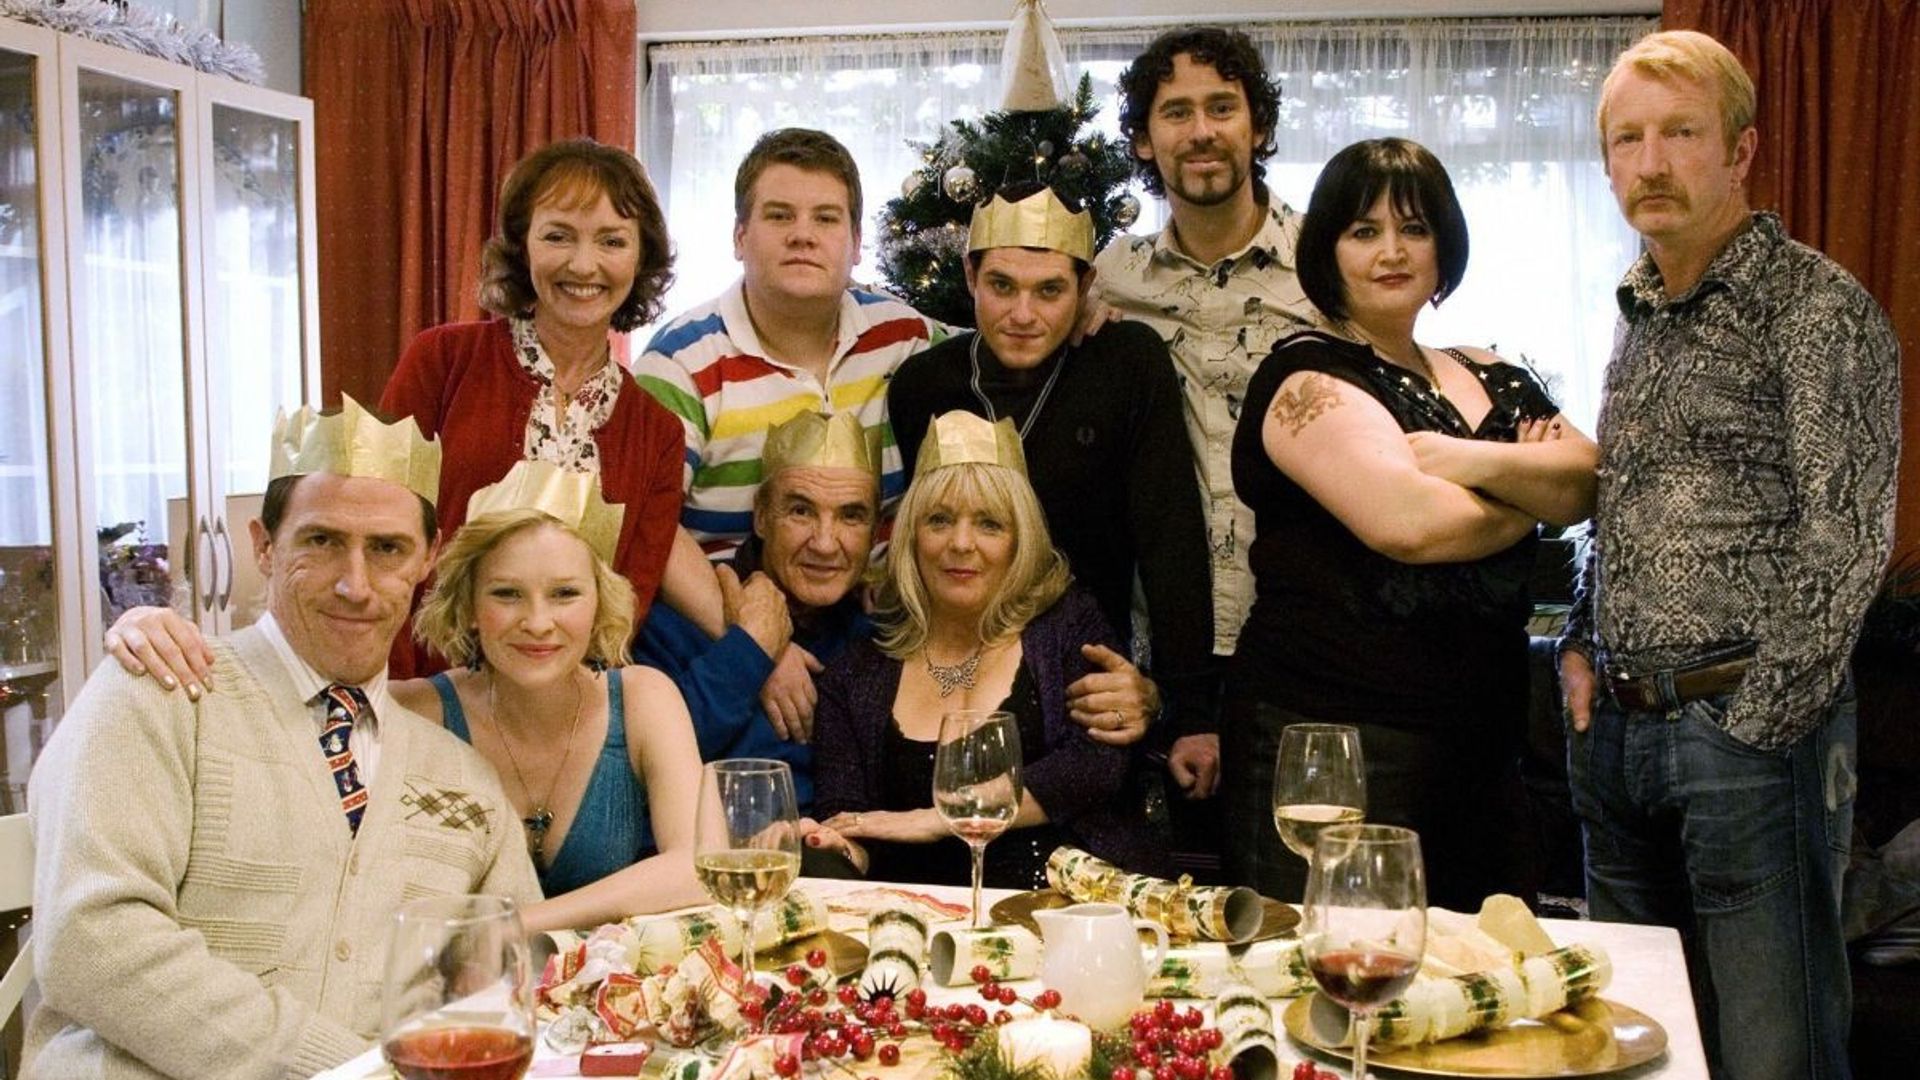 gavin and stacey group